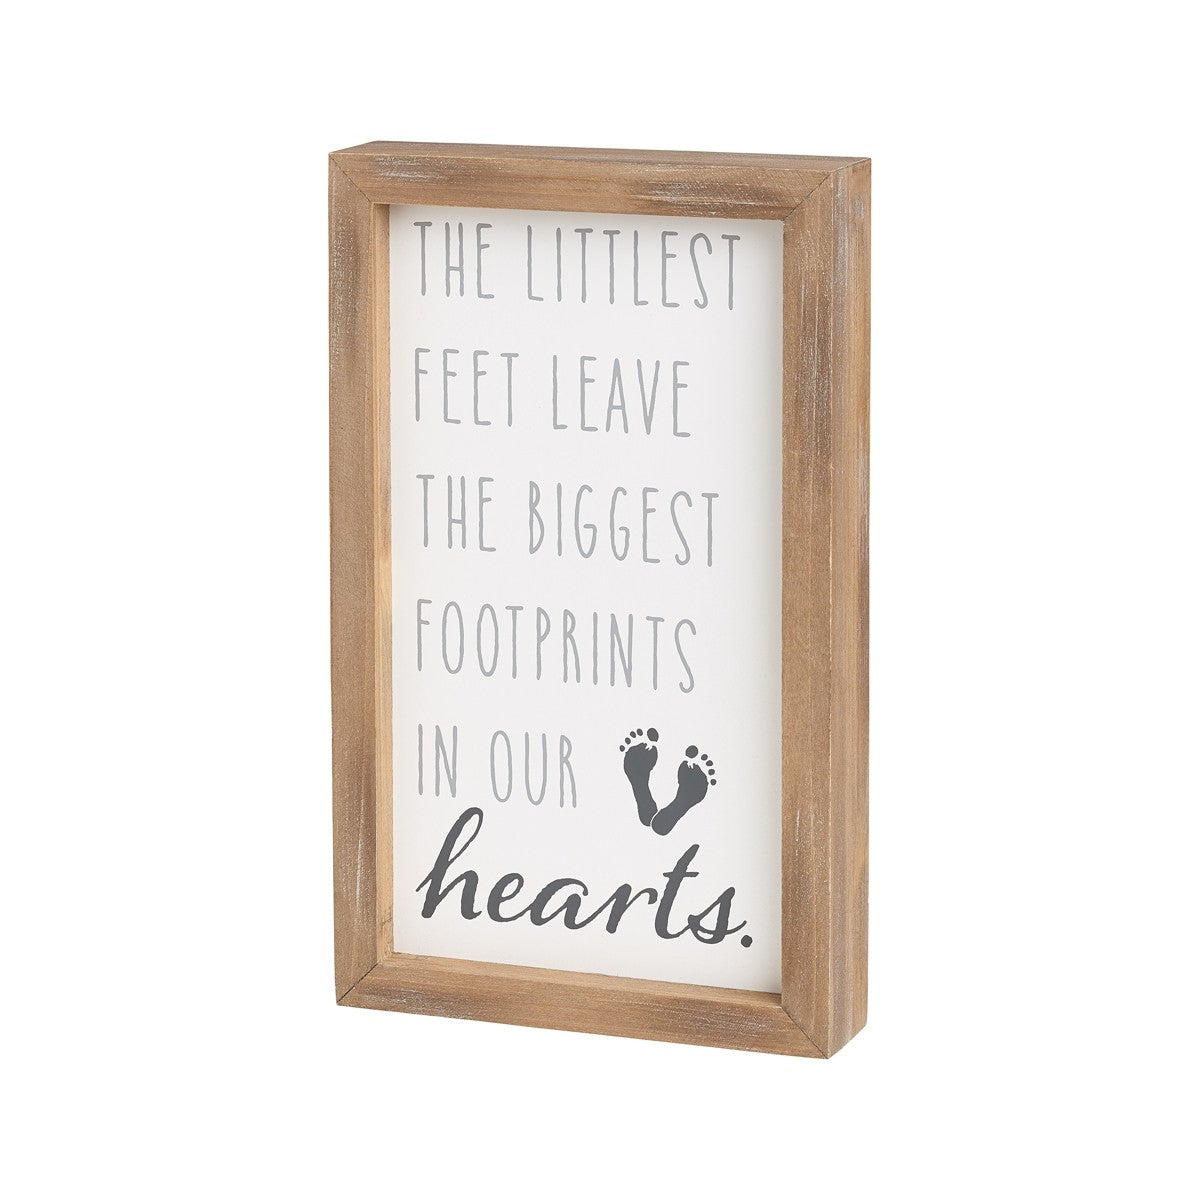 Footprints in Our Heart - Sign